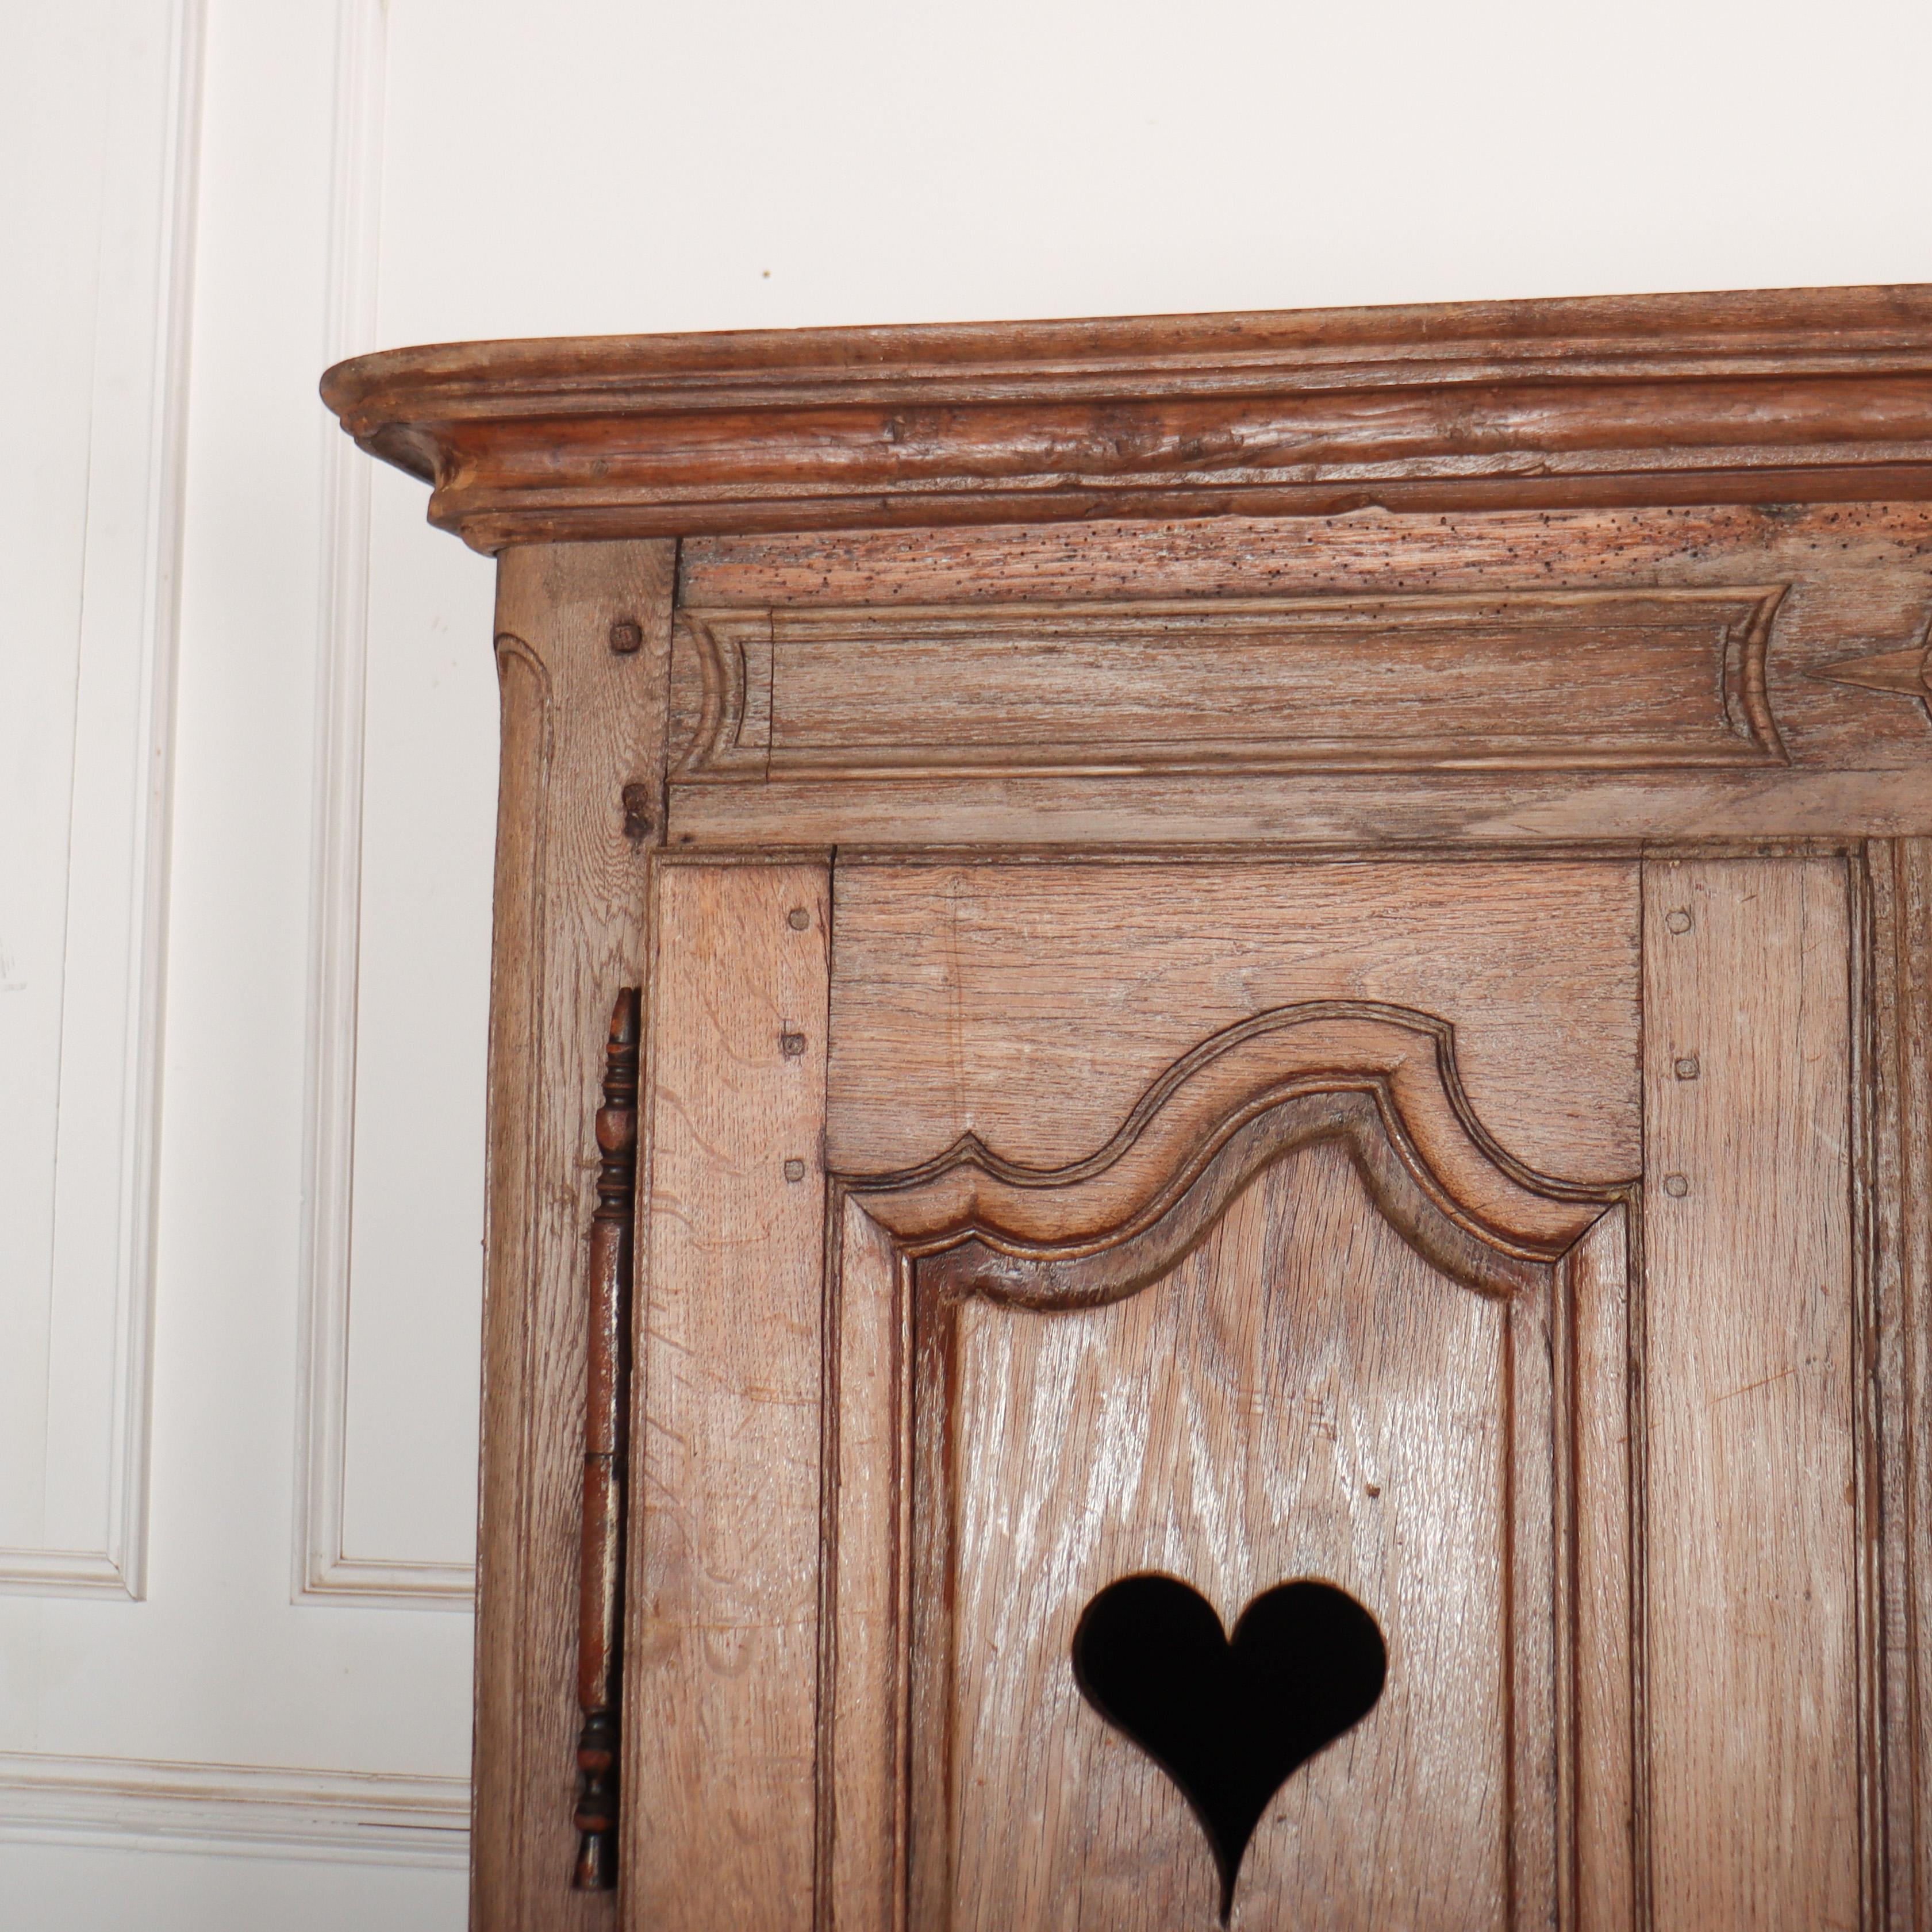 Wonderful little 19th C French bleached oak armoire / linen cupboard with stylised hearts in door panels. 1840.

Reference: 8272

Dimensions
51.5 inches (131 cms) Wide
18.5 inches (47 cms) Deep
74.5 inches (189 cms) High